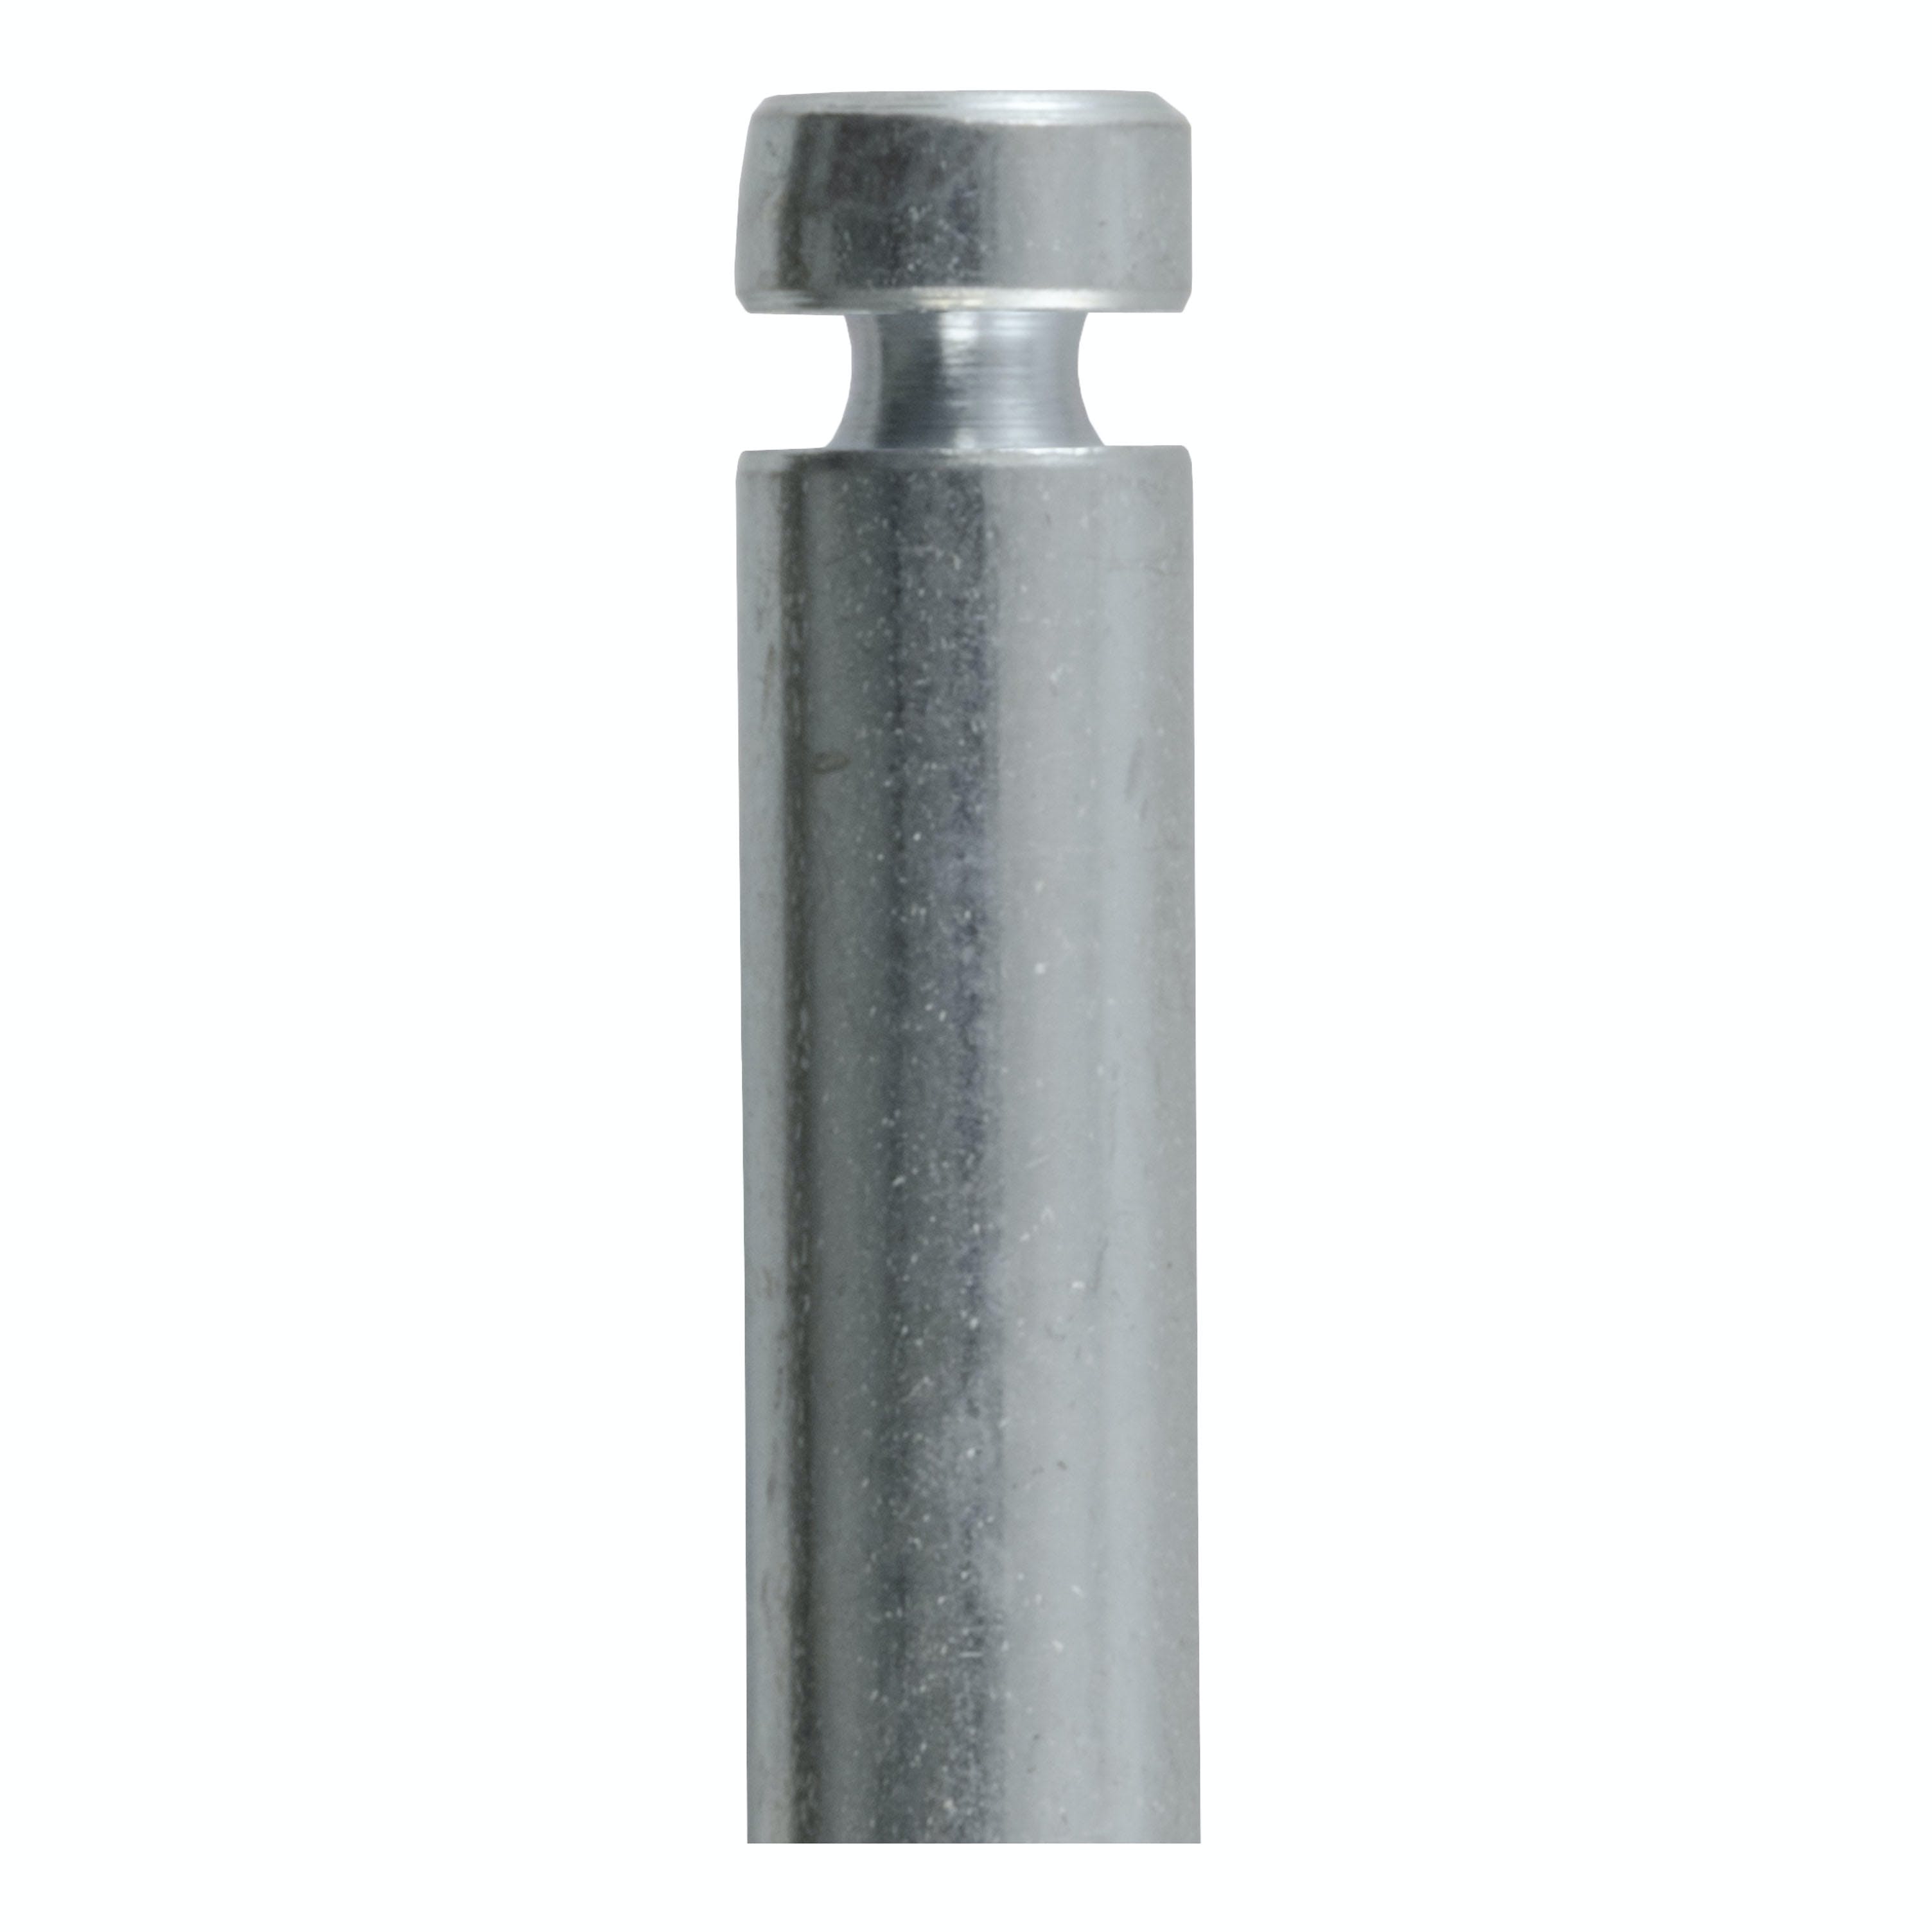 CURT 21404 1/2 Hitch Pin with Groove (1-1/4 Receiver, Zinc, Packaged)